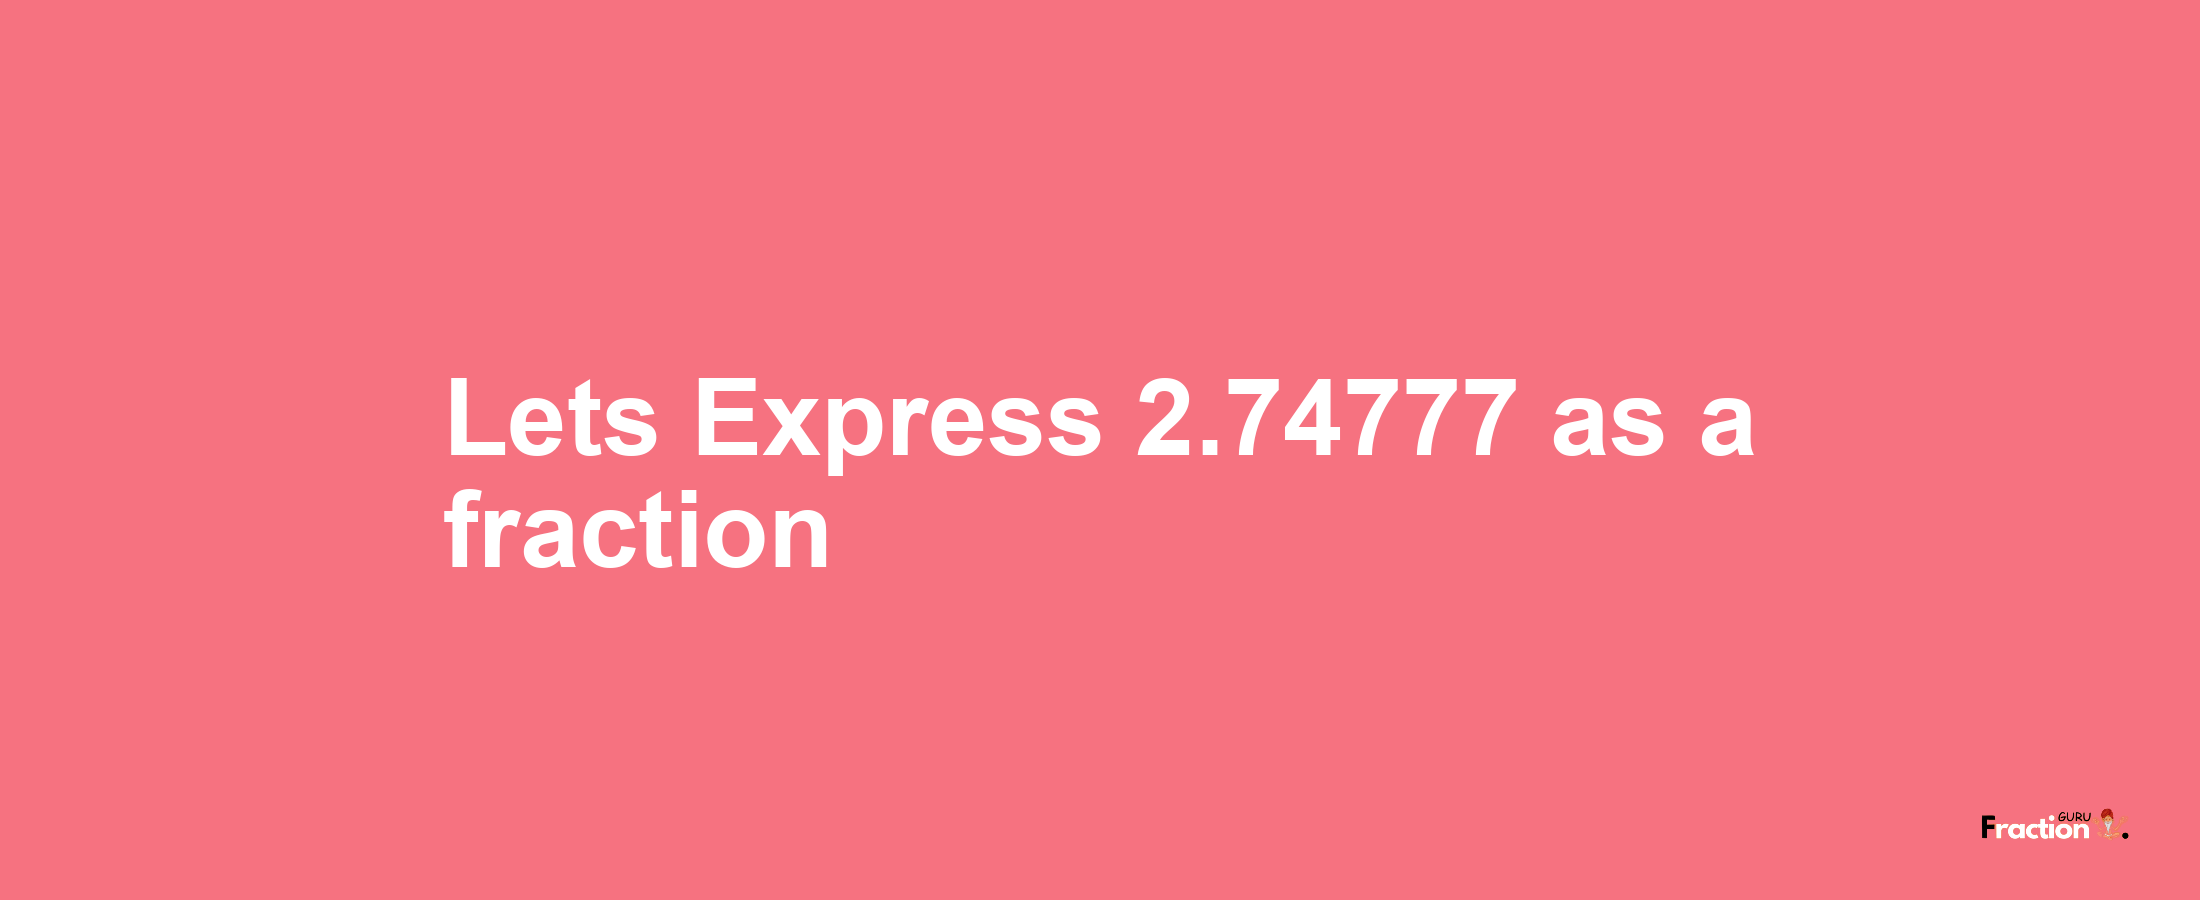 Lets Express 2.74777 as afraction